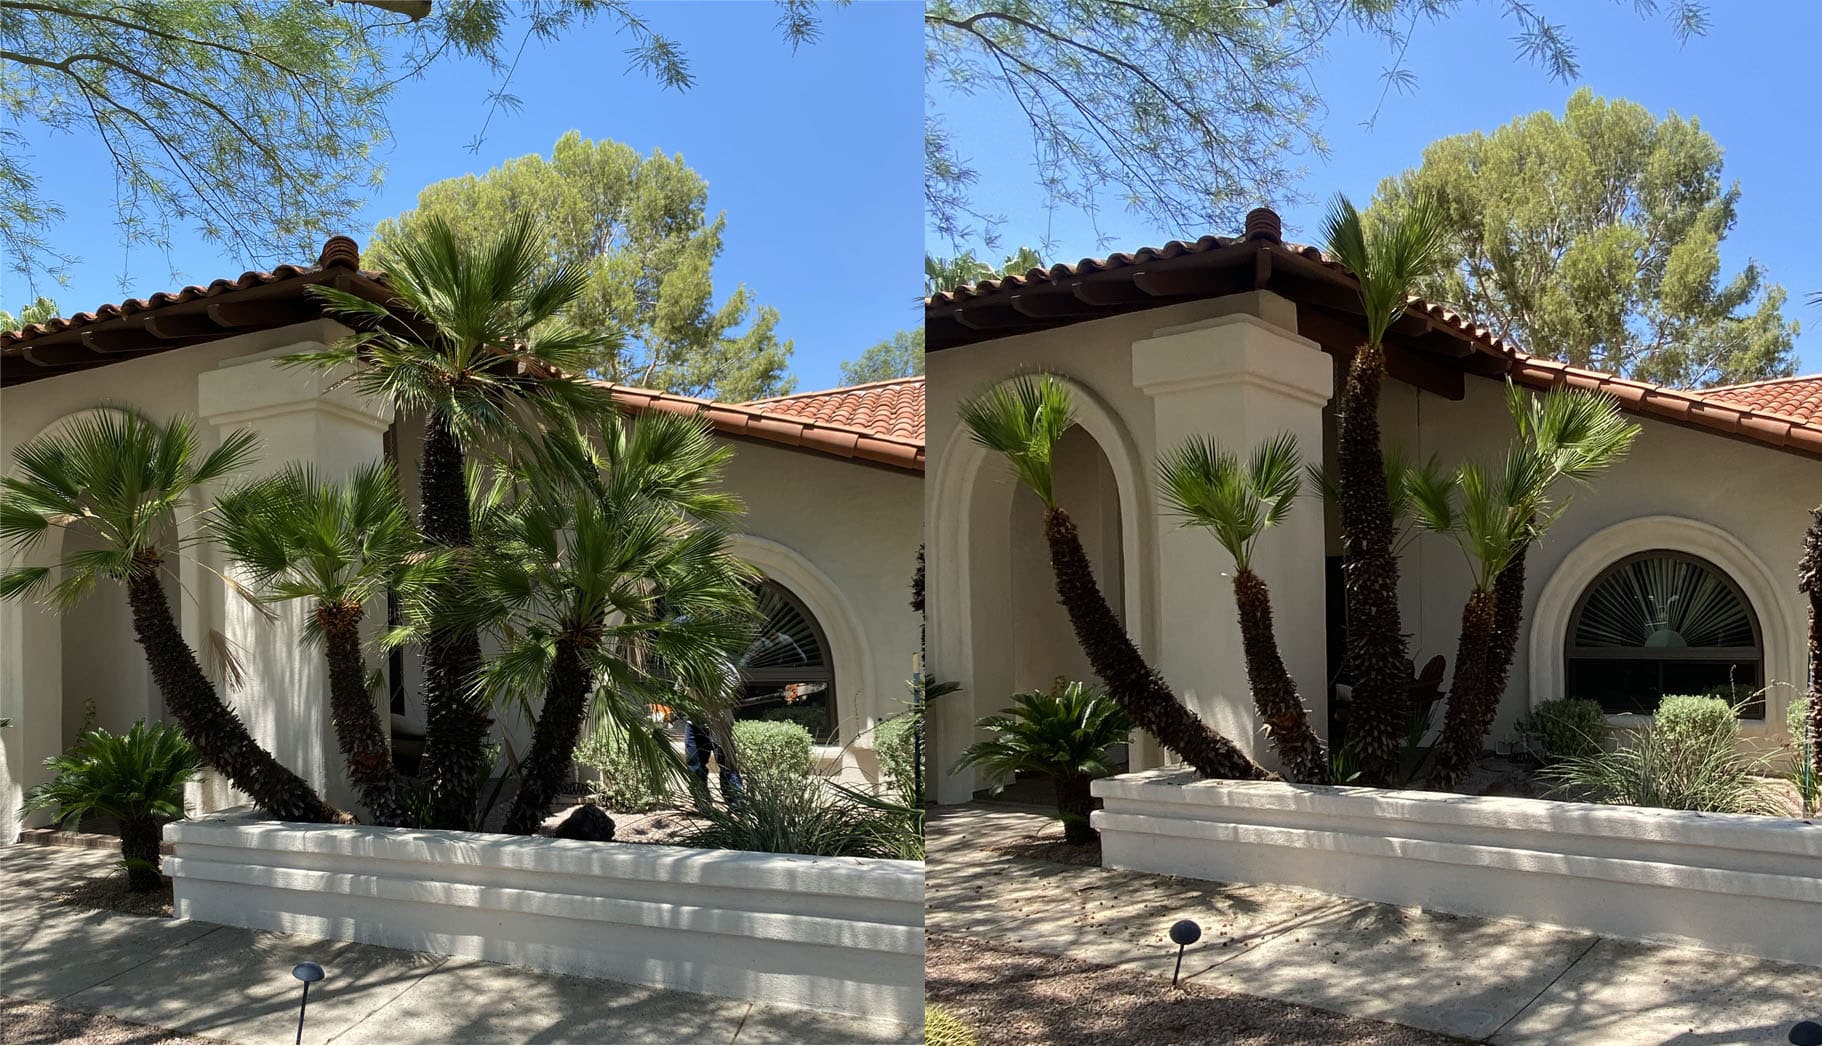 Happy Tree Guys - Trimming and Removal - Scottsdale, AZ, US, tree service near me